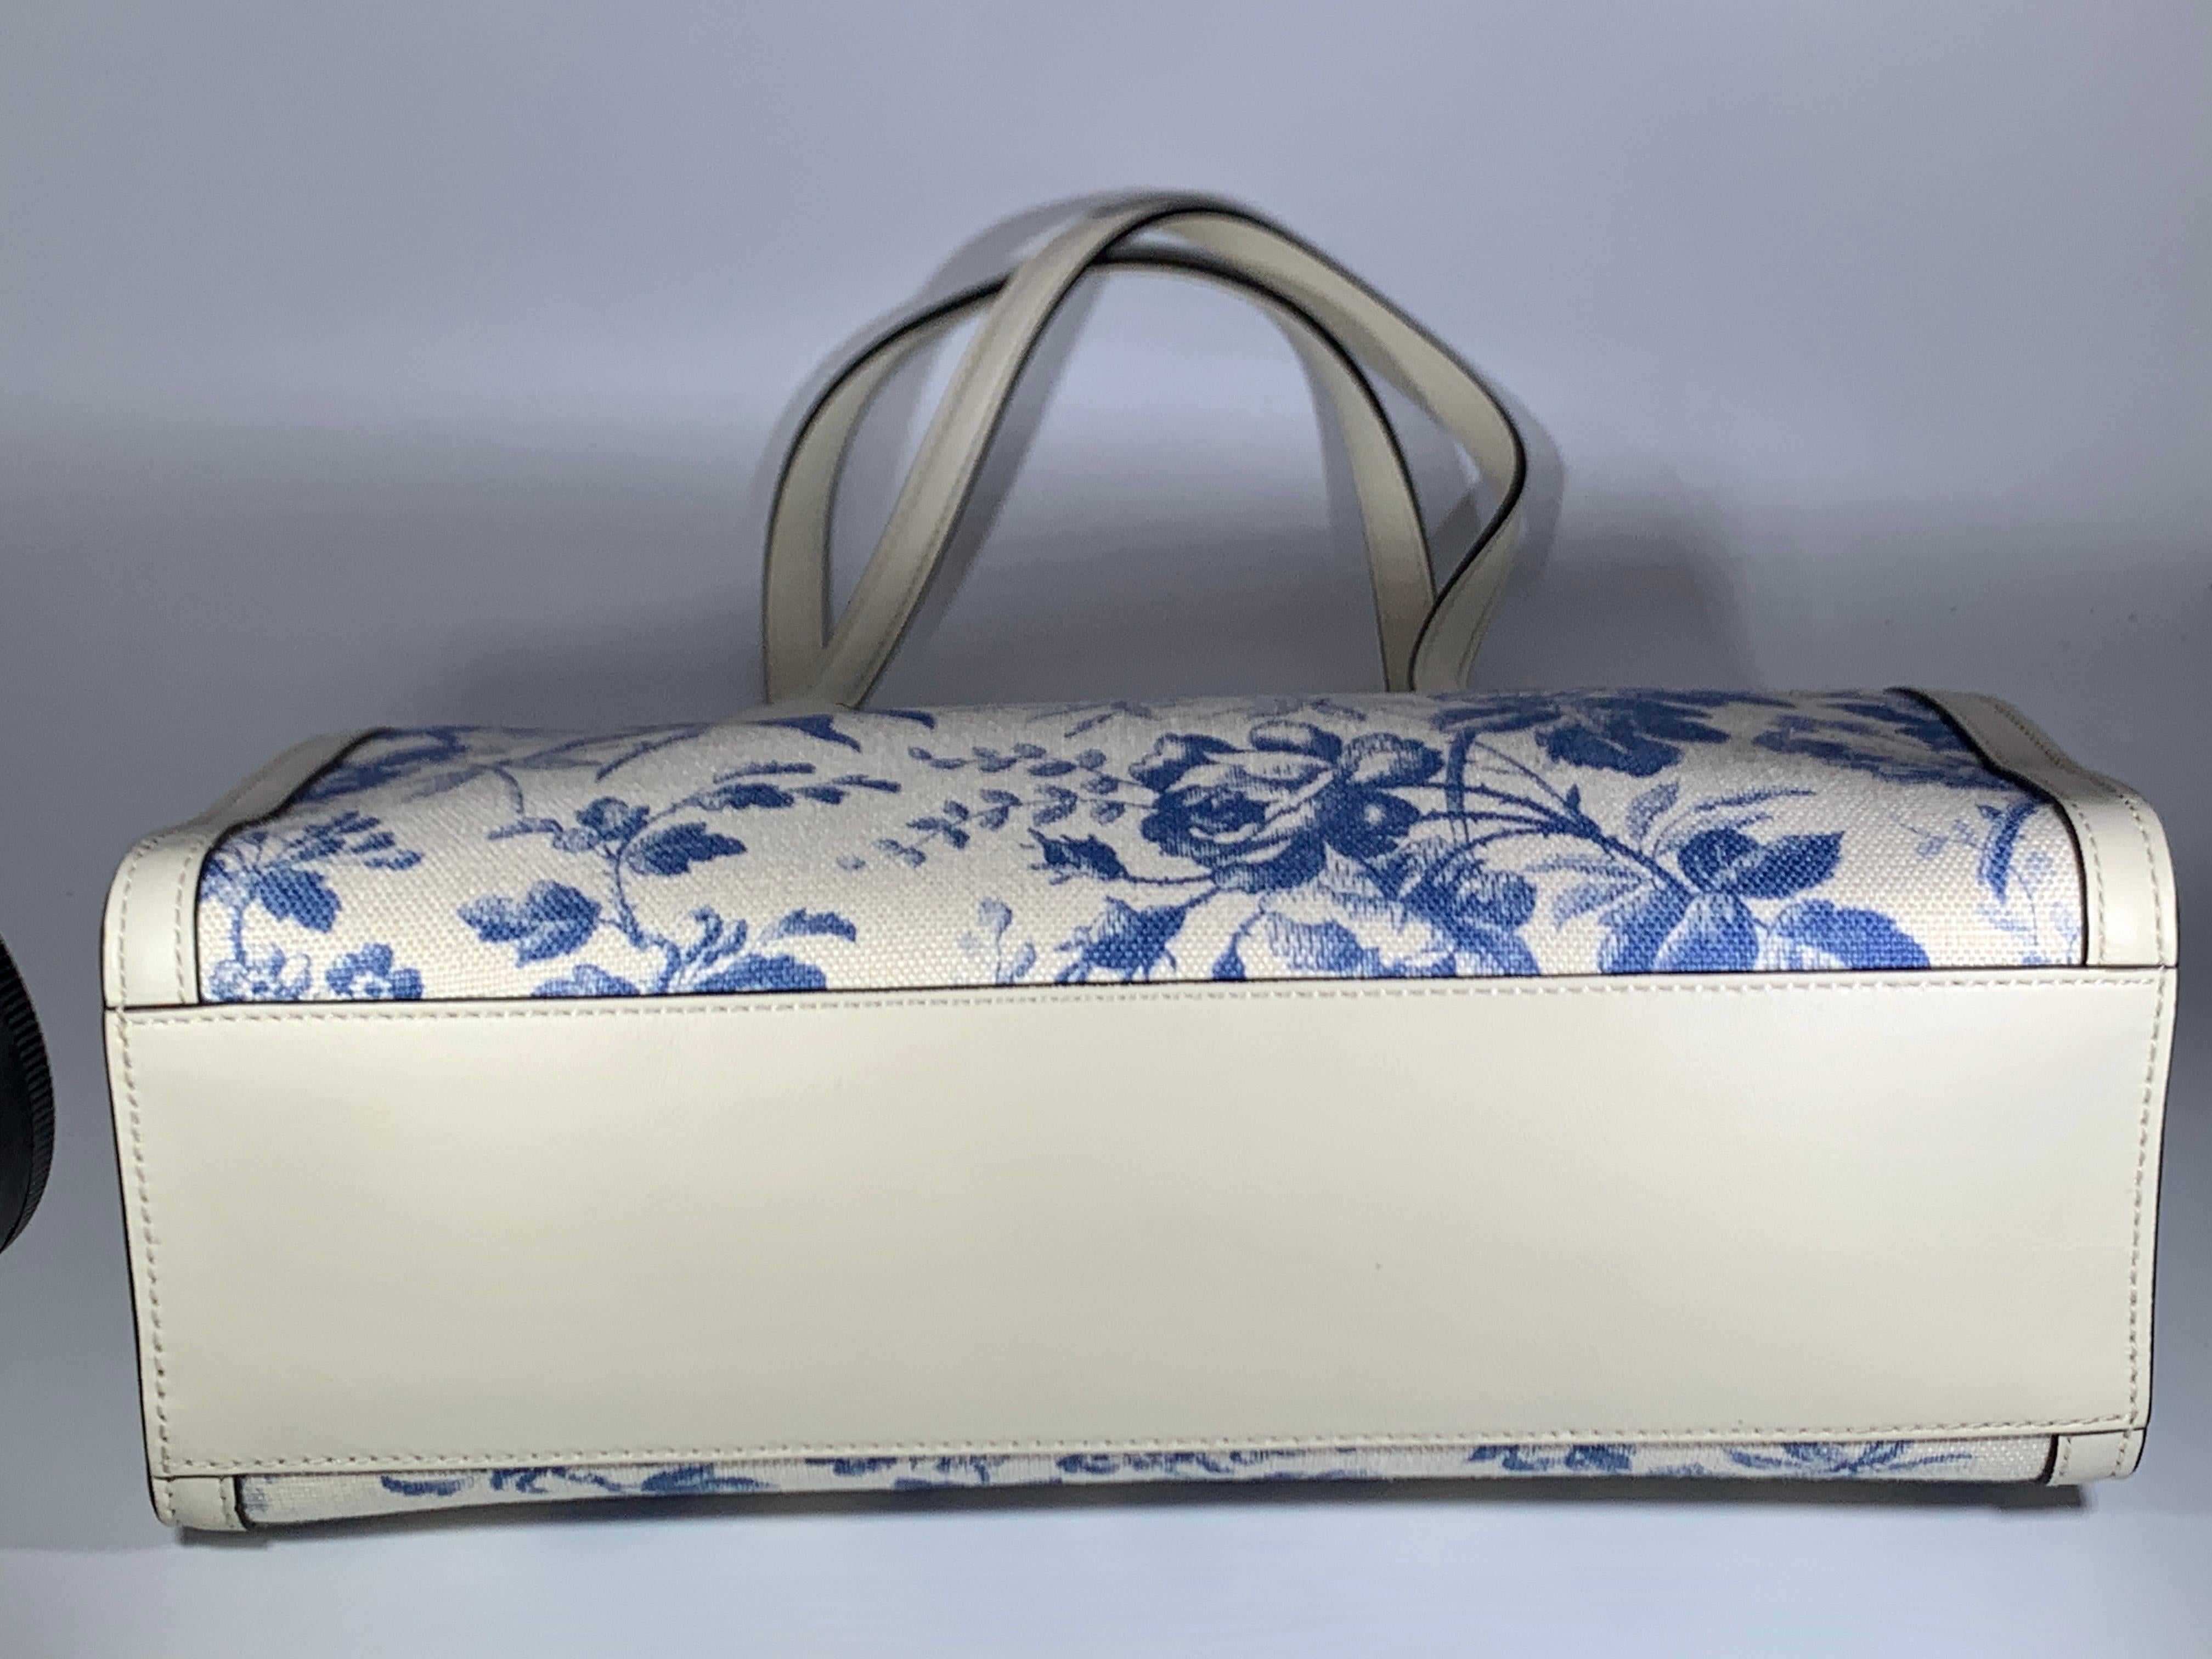  Gucci Flora Whites Canvas Leather Trim Navy Blue With Flowers  Tote Handbag  3